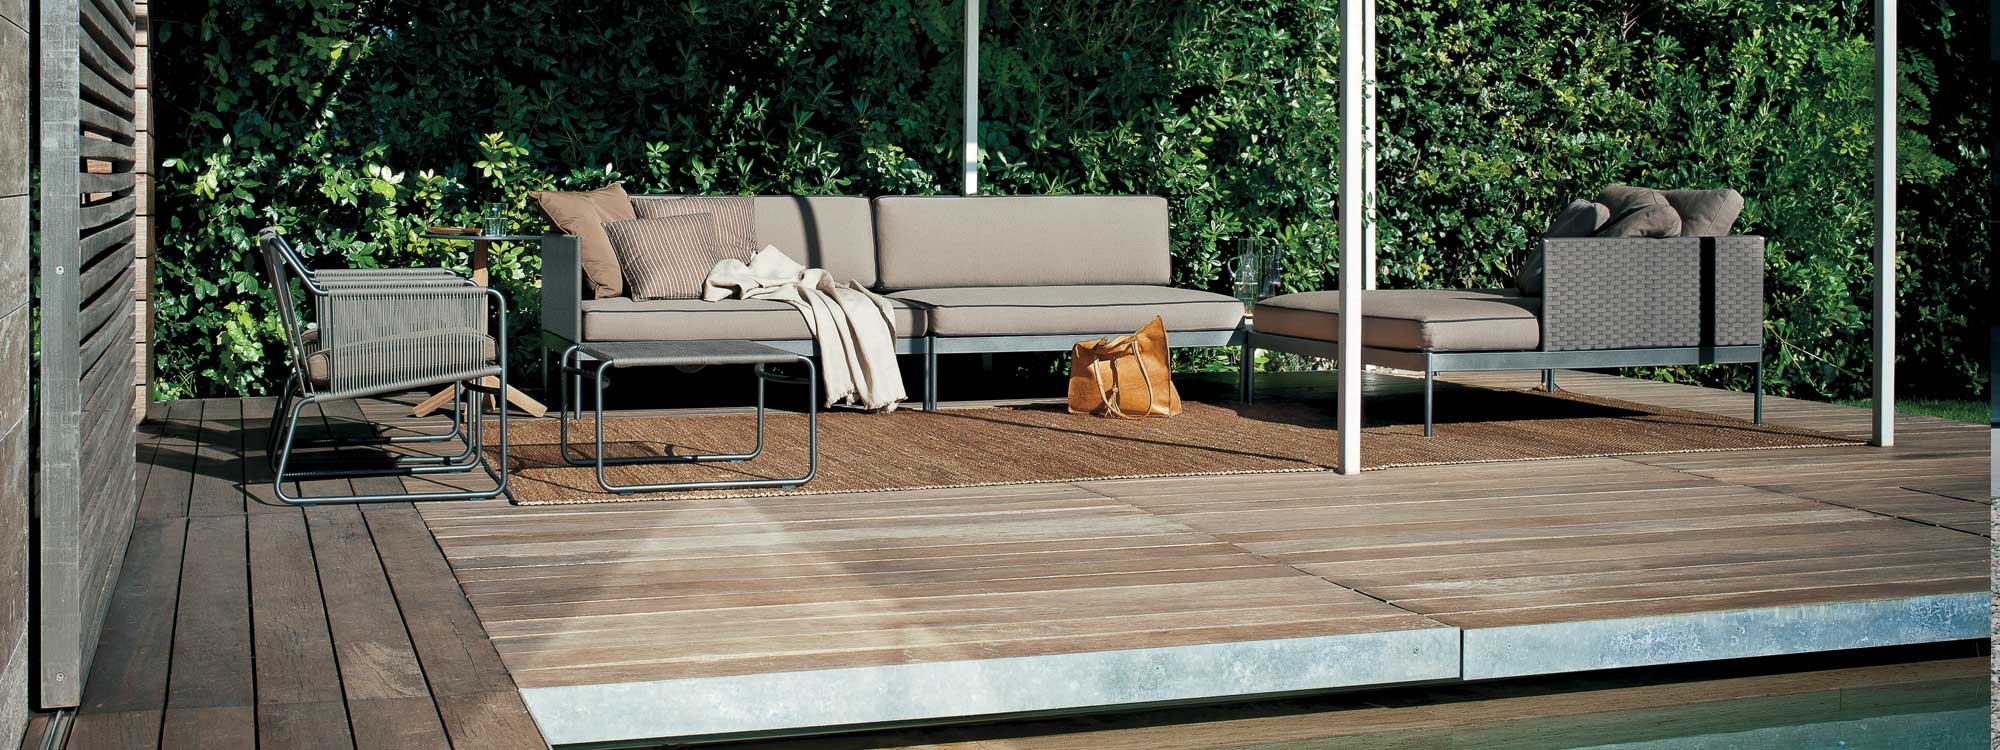 Image of Basket modern outdoor sofa with smoke colored frame and taupe cushions together with Harp lounge chair and foot stool, shown on minimalist wooden deck with plants in background